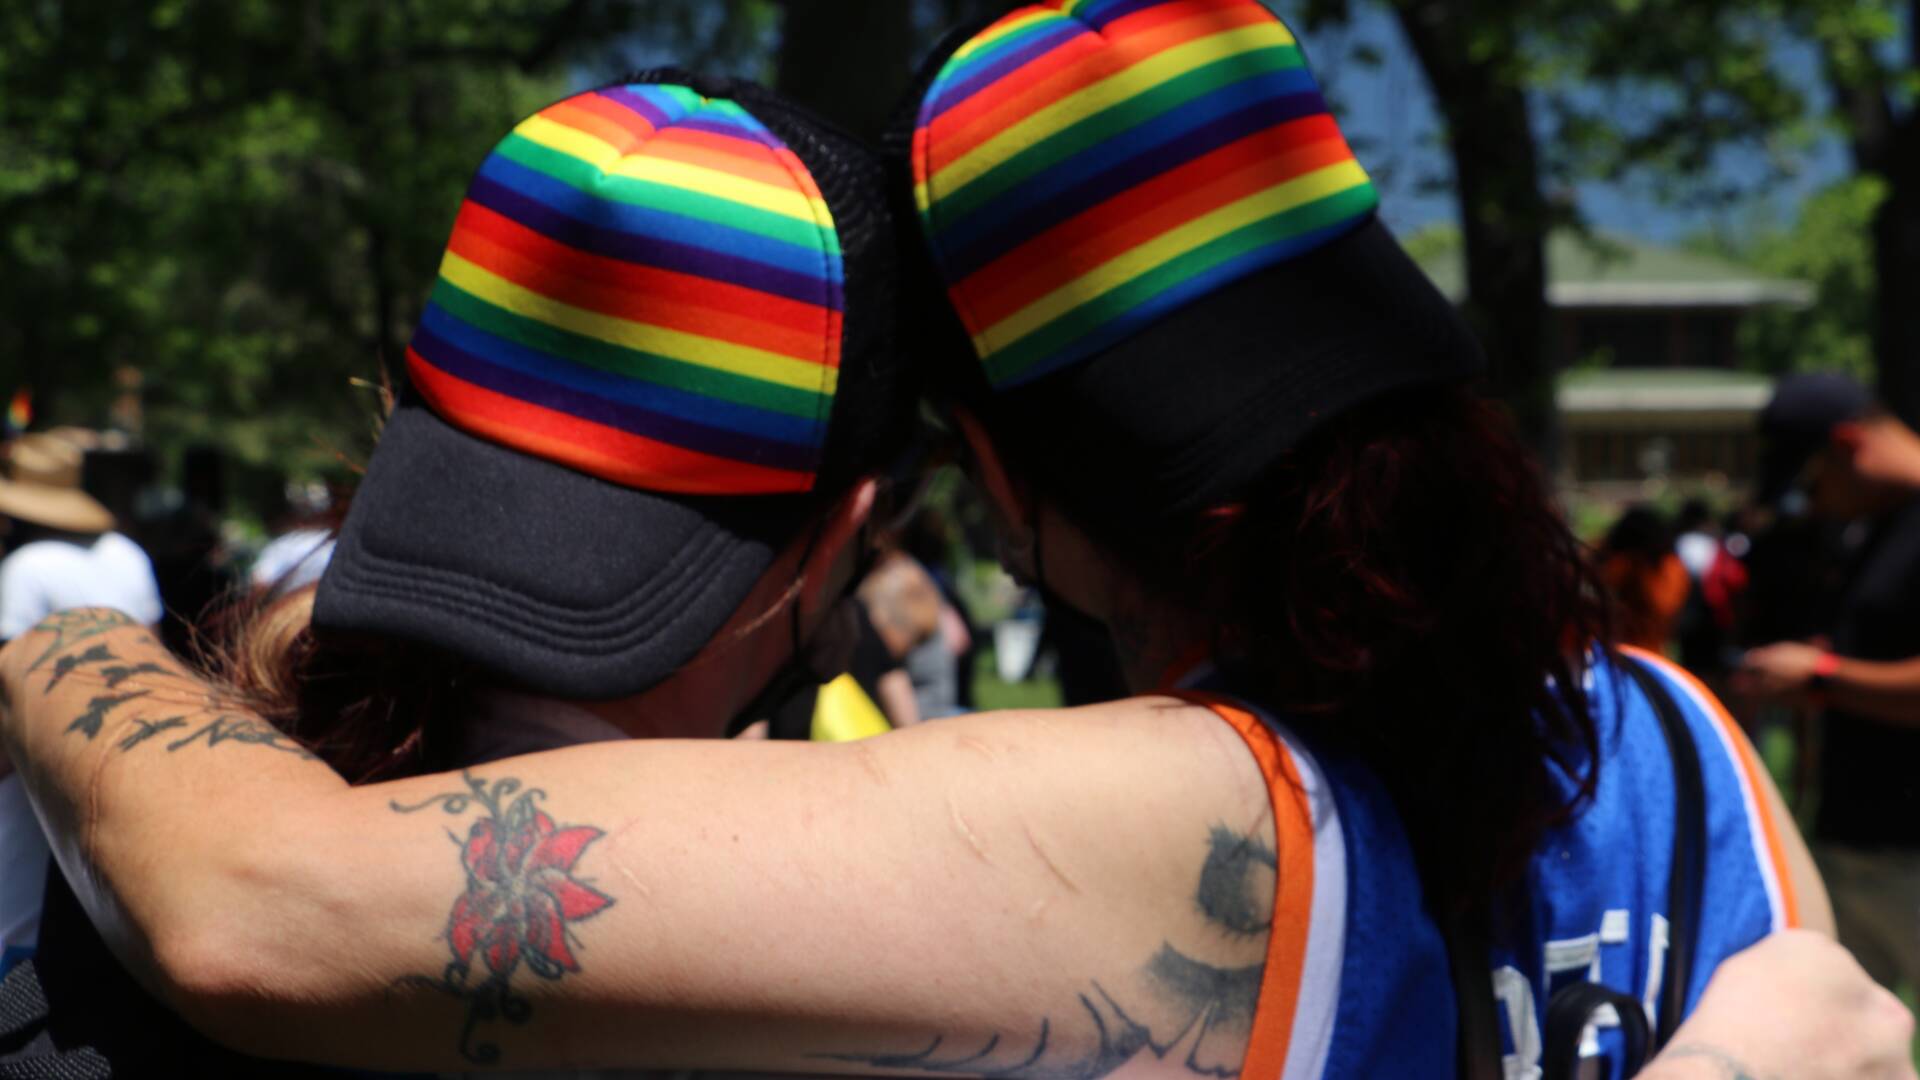 queer couple from behind at pride festival